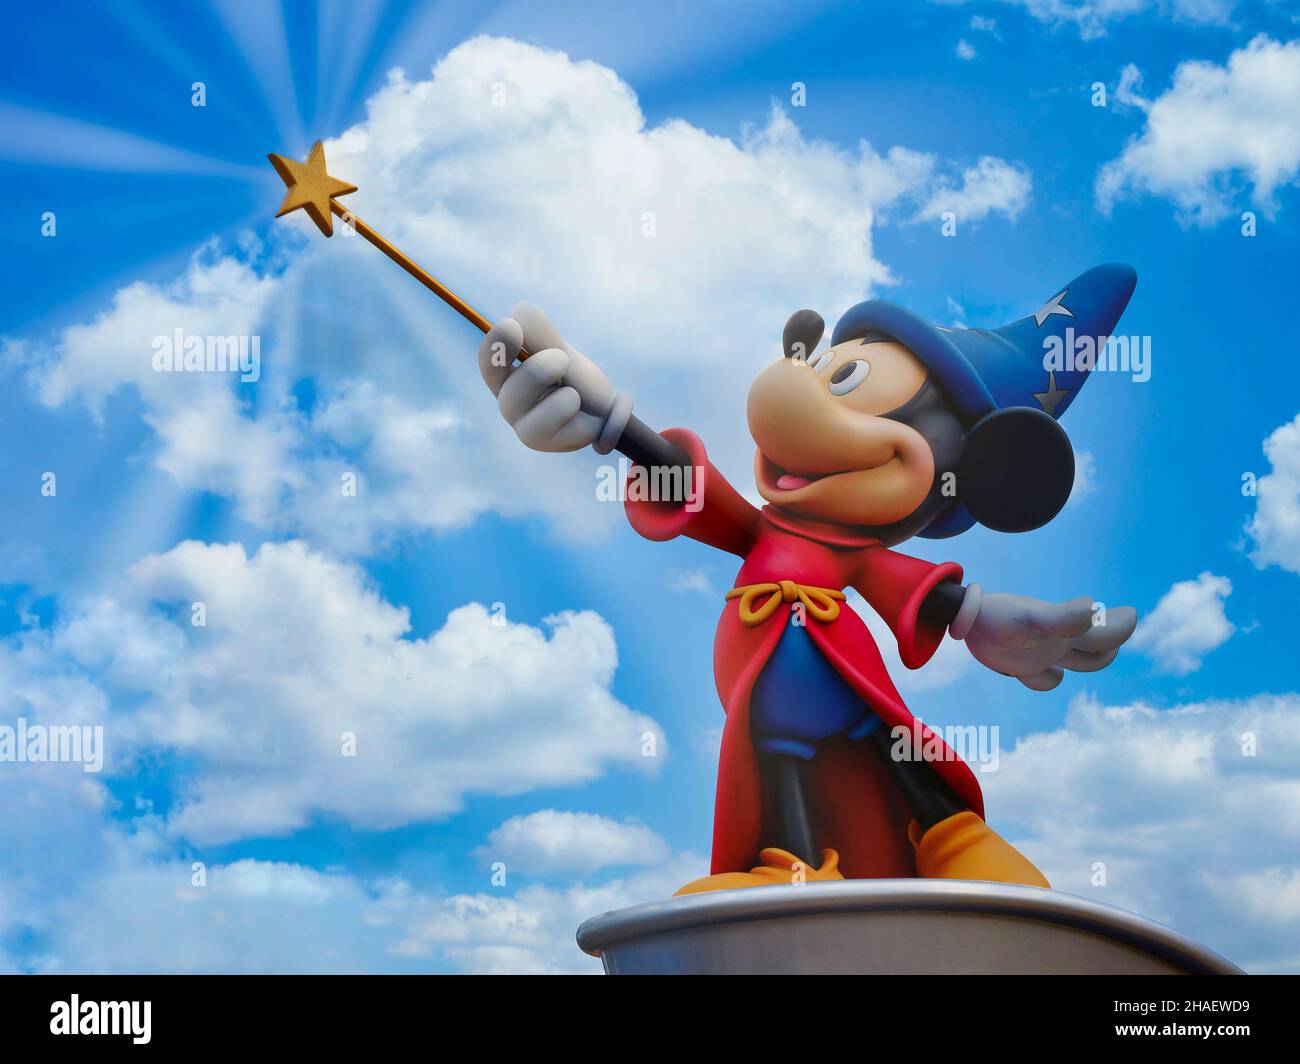 Paris, France - April 2019: michey mouse wizard statue holding magic wand Stock Photo